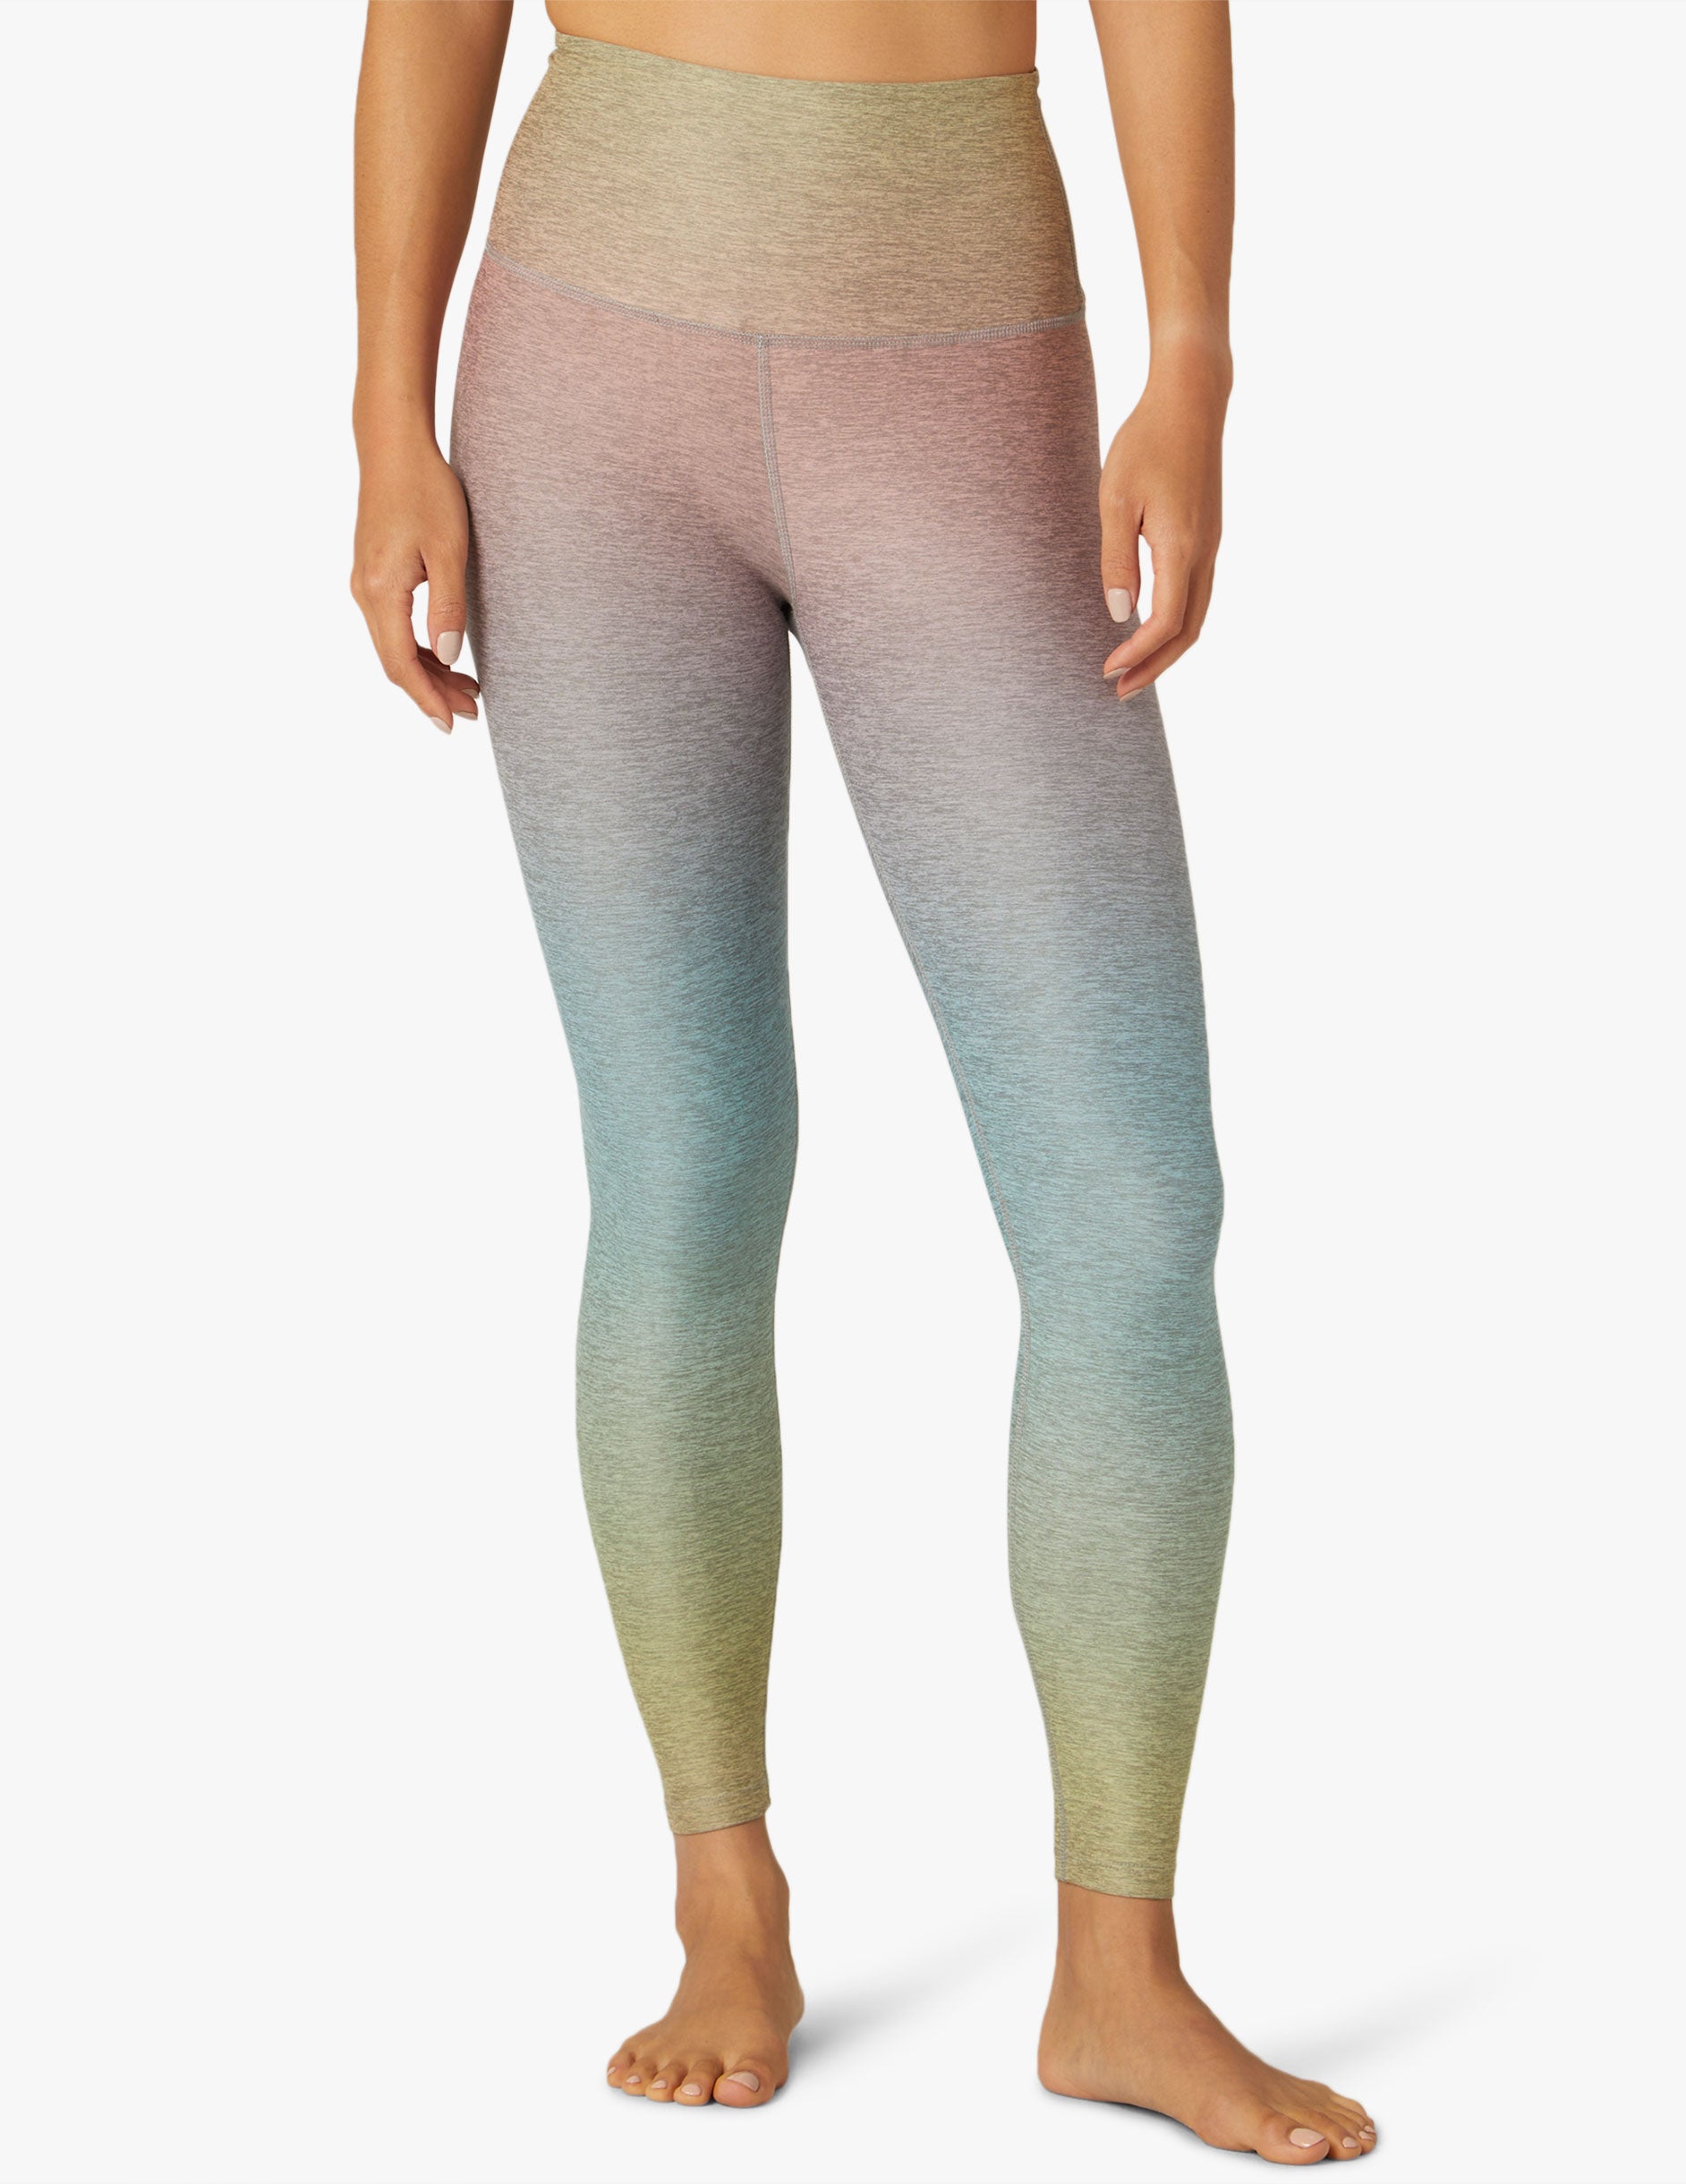 Our gorgeous Hexagon Hues Super Soft Leggings are everything you